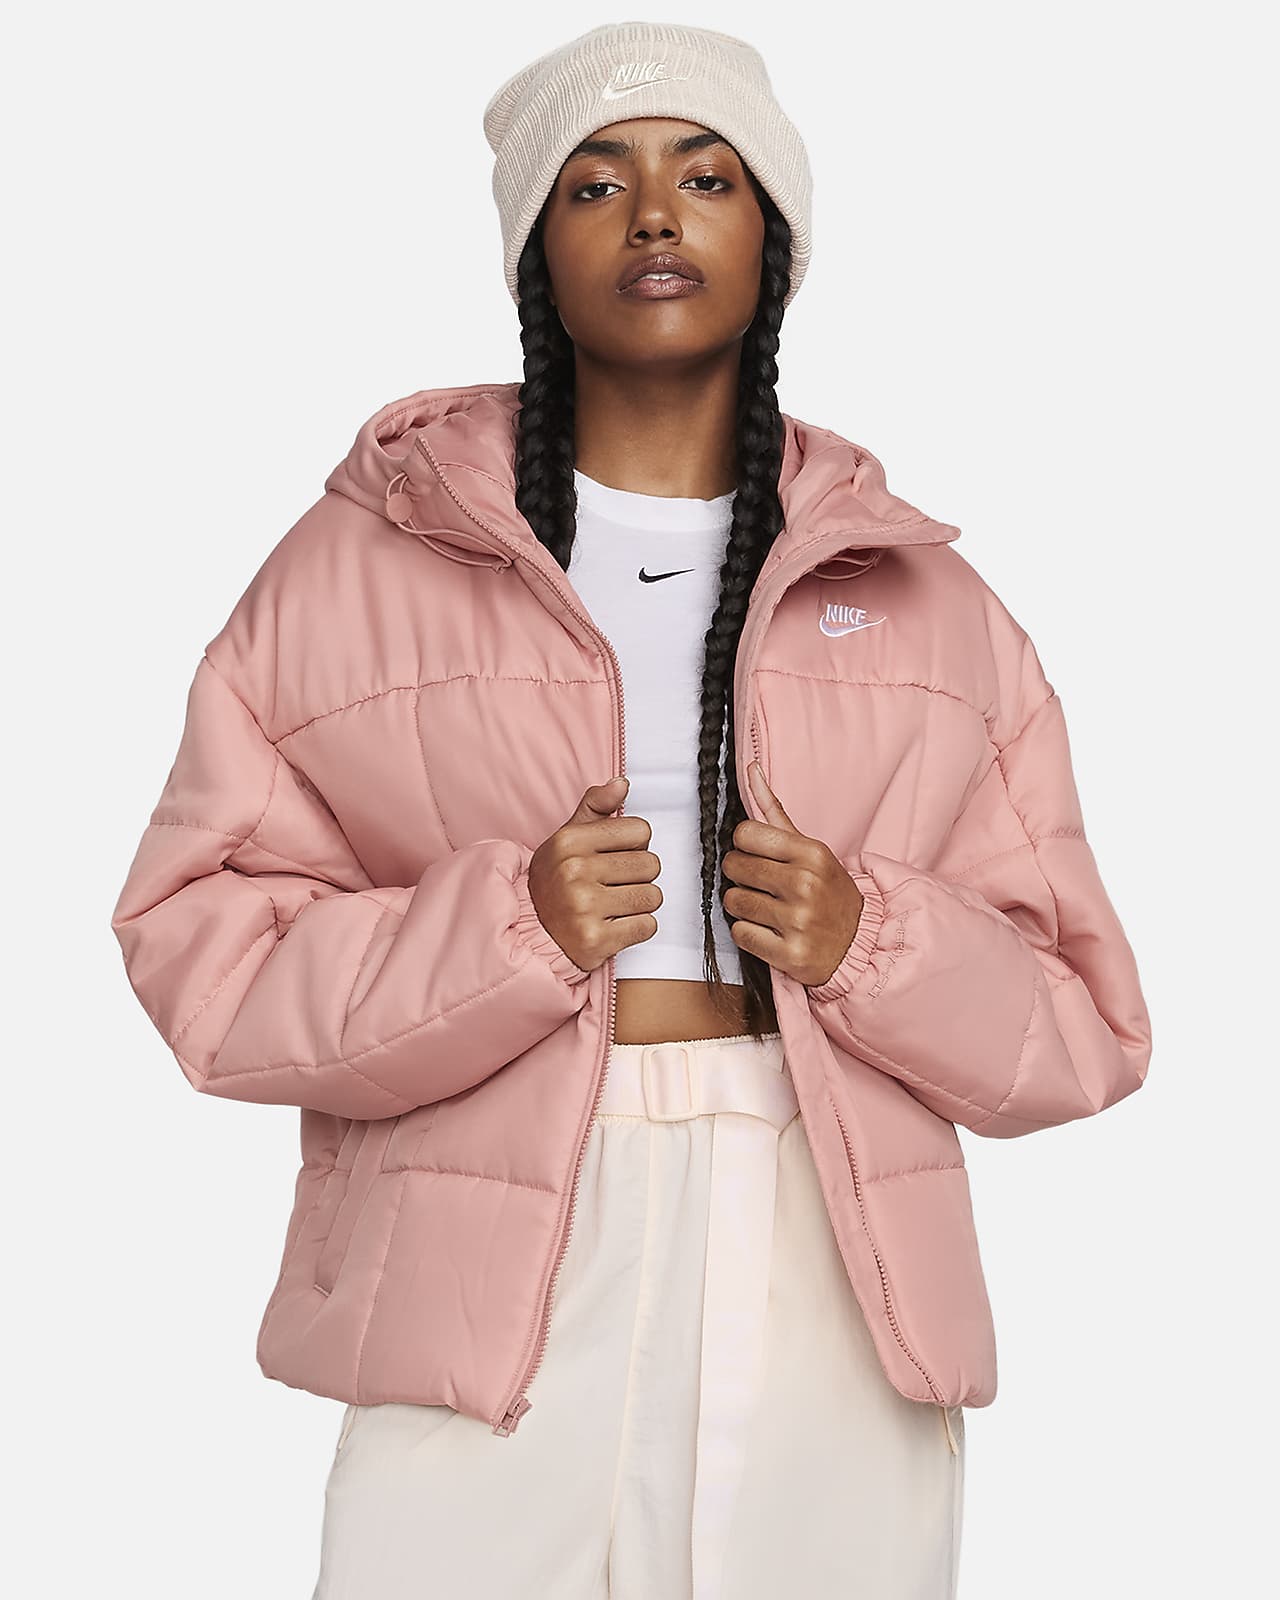 Women's Pink Jackets, Explore our New Arrivals